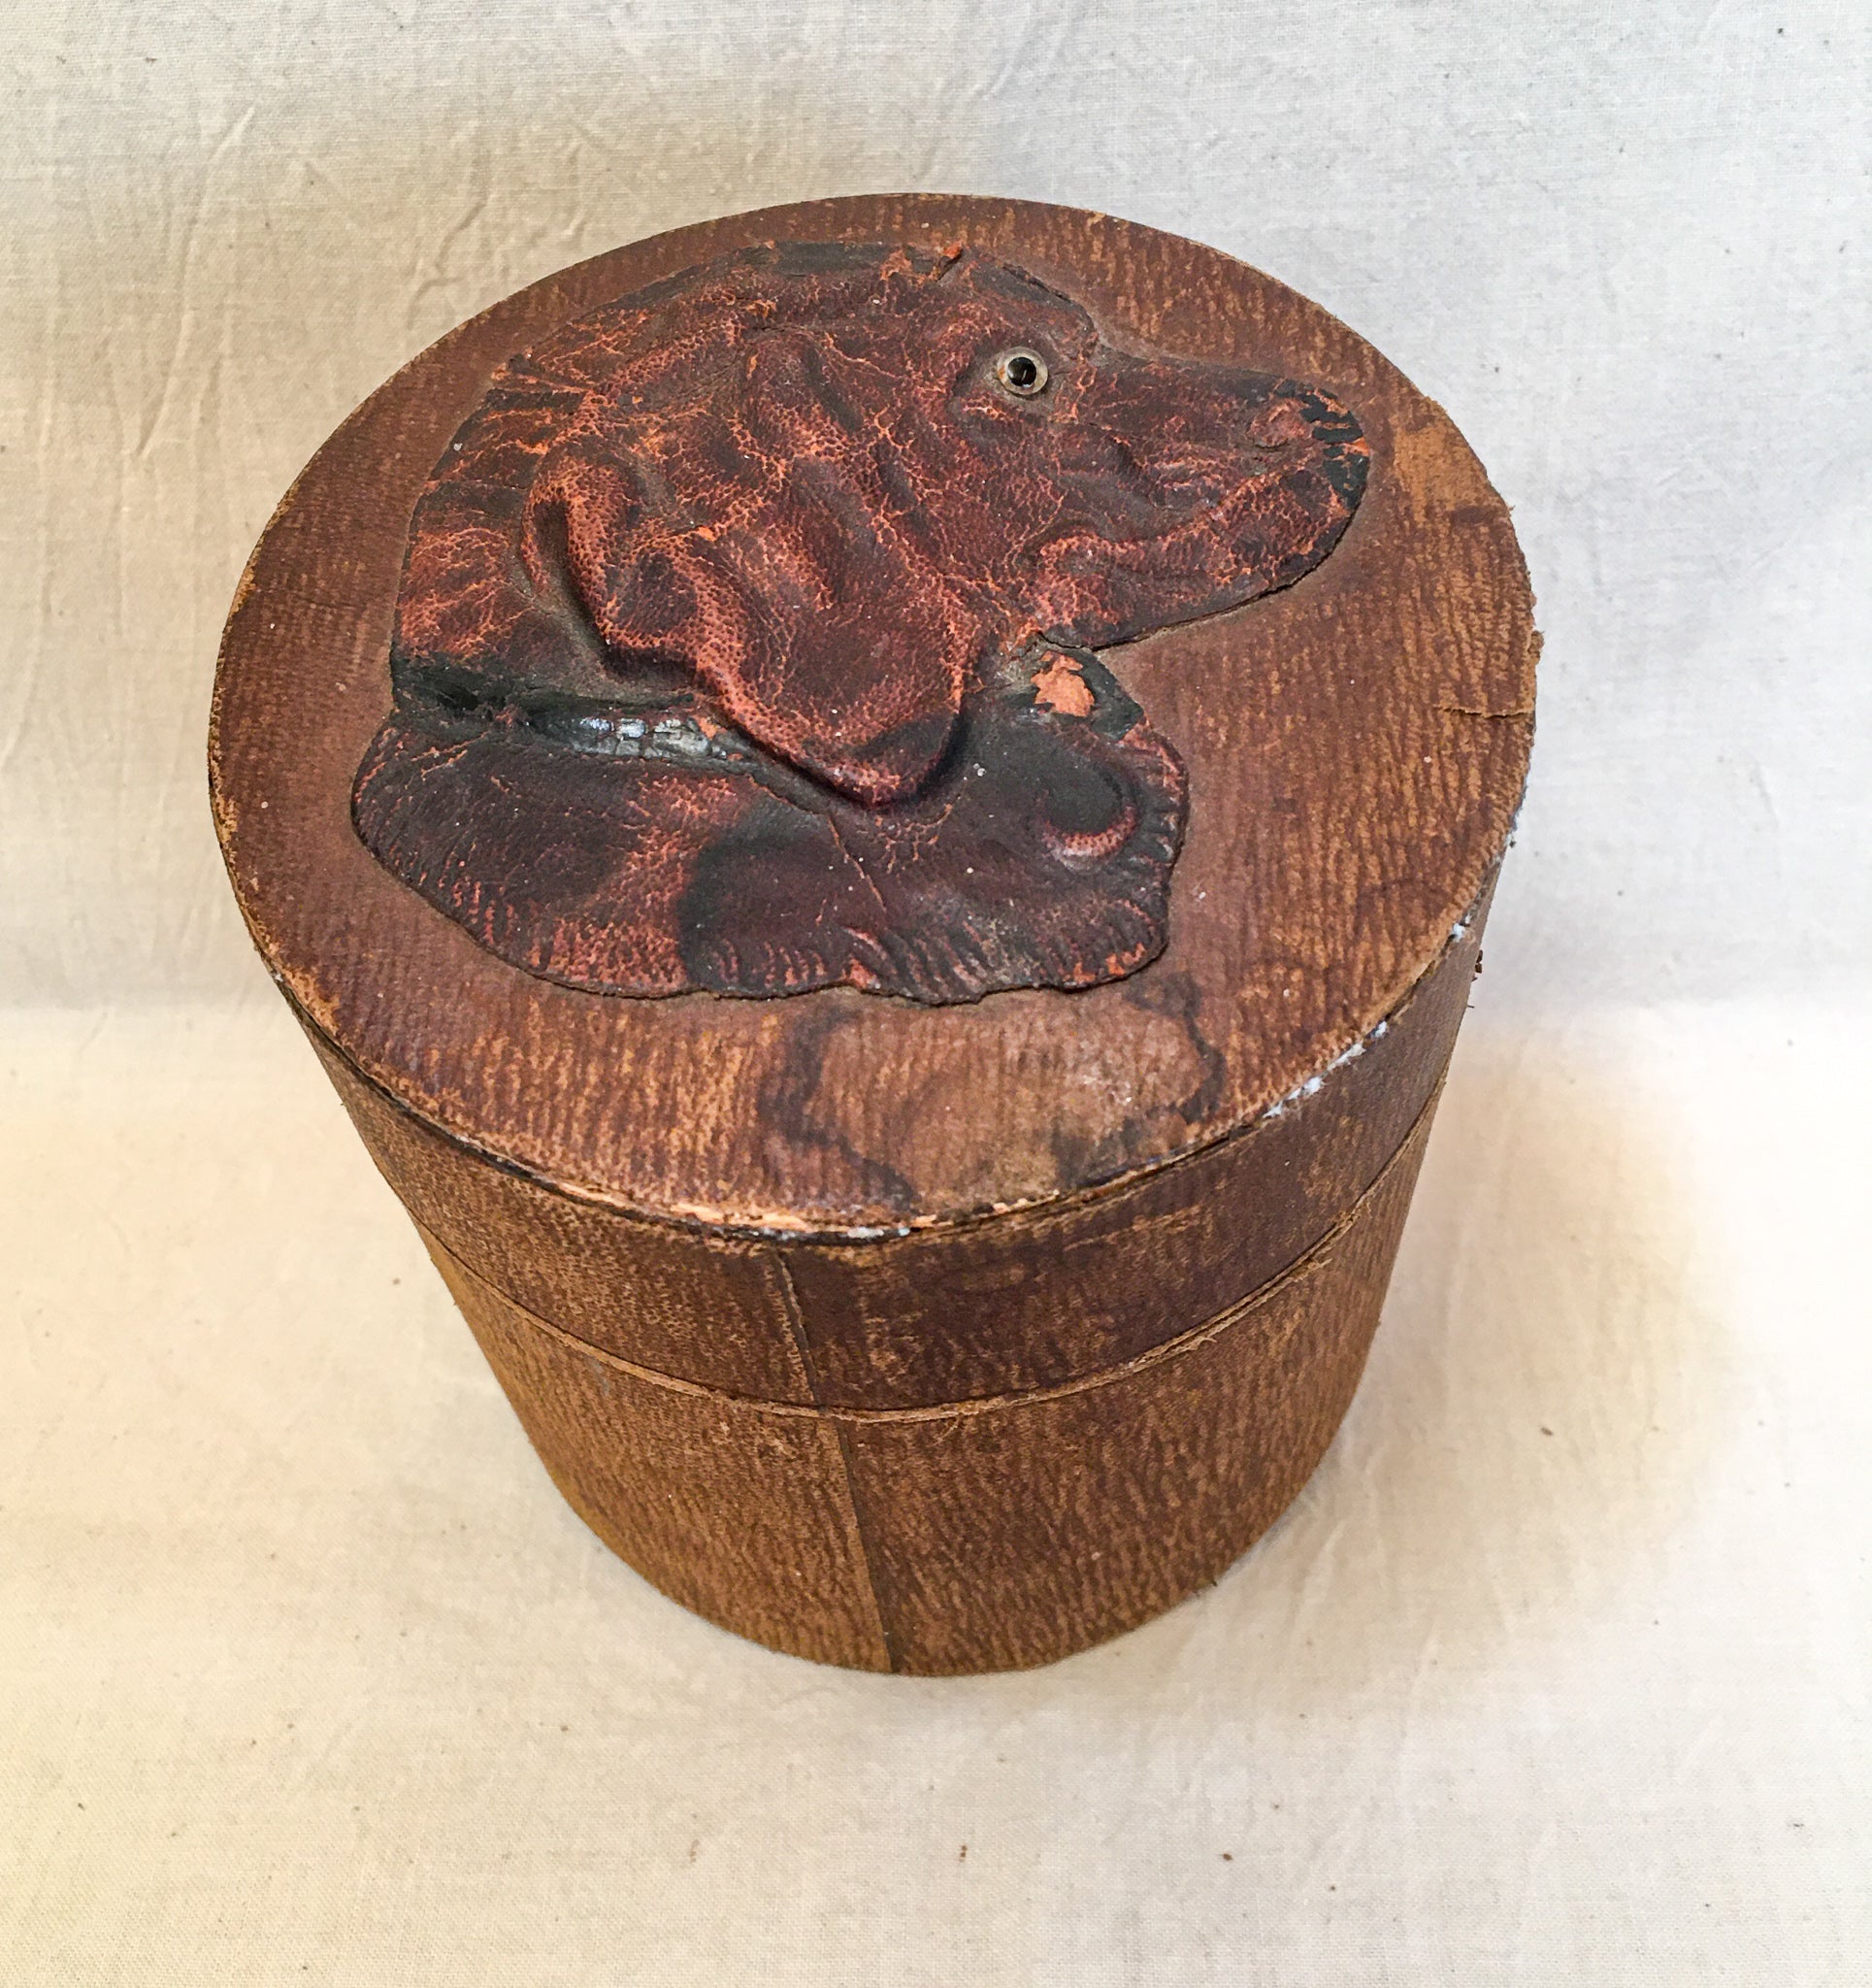 Late 1800’s – Early 1900’s Leather Collar Box with Dog Decoration